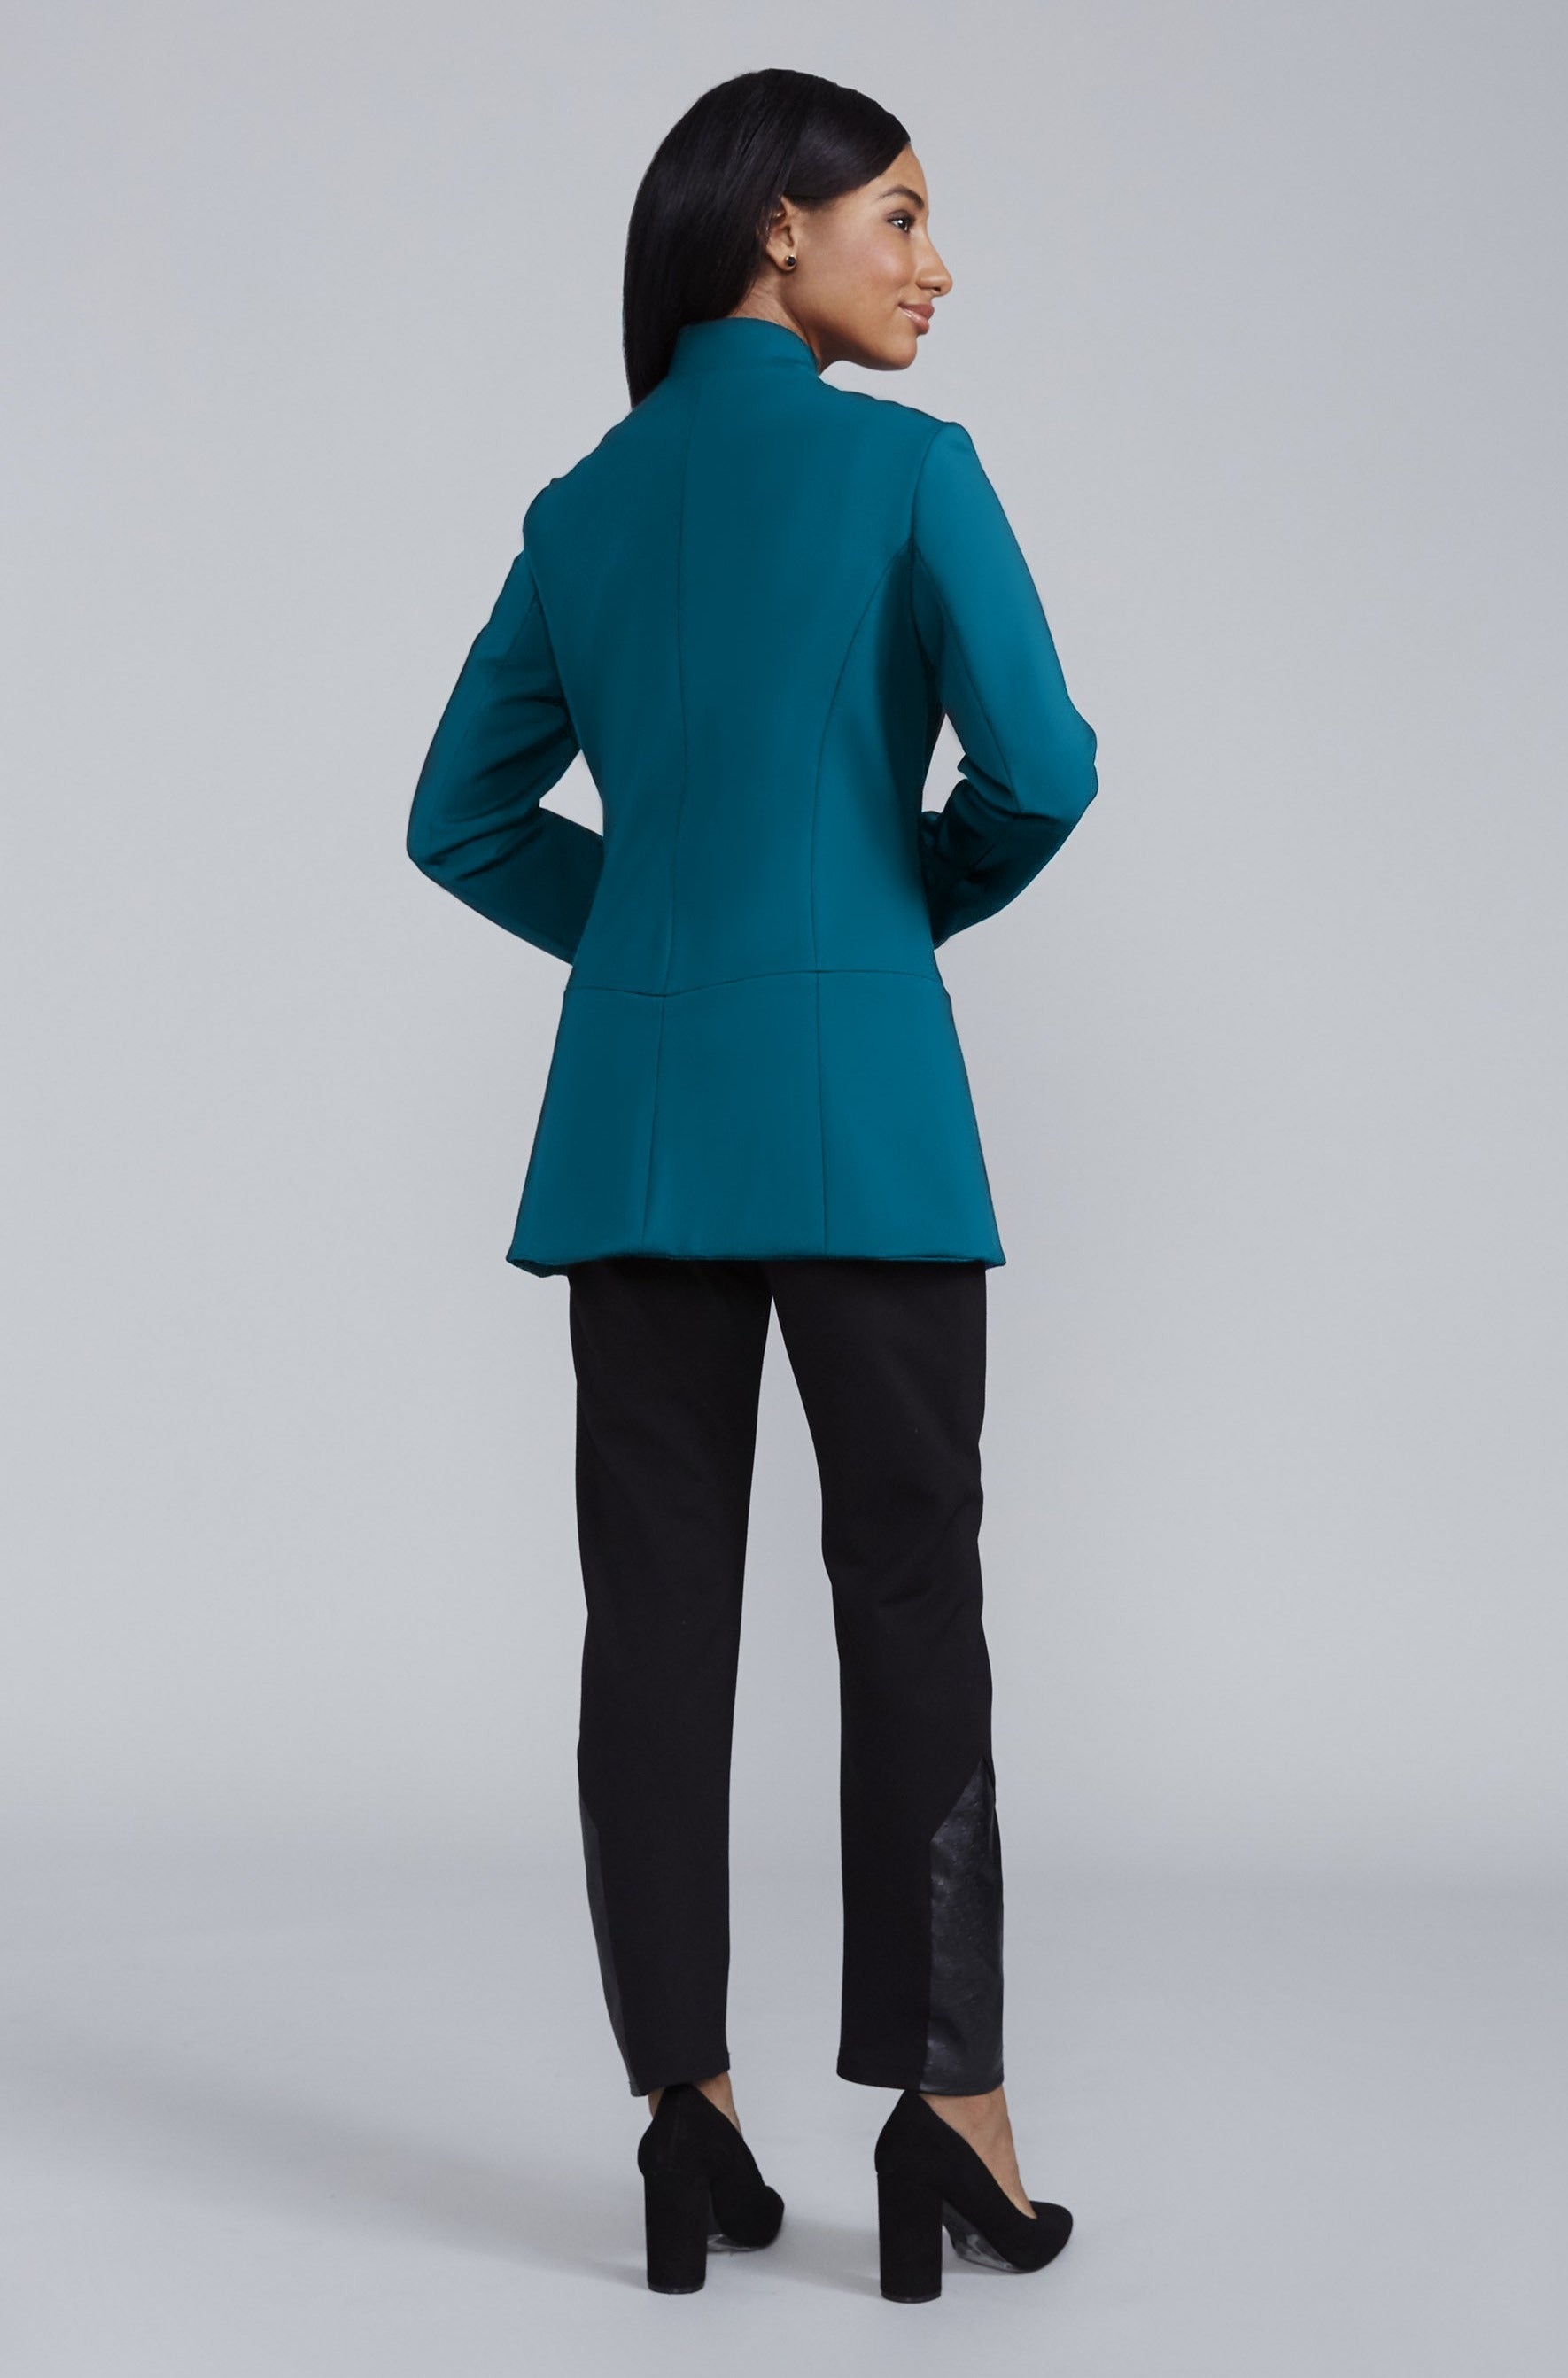 Women' Business Palermo Jacket - Teal NORA GARDNER | OFFICIAL STORE for work and office